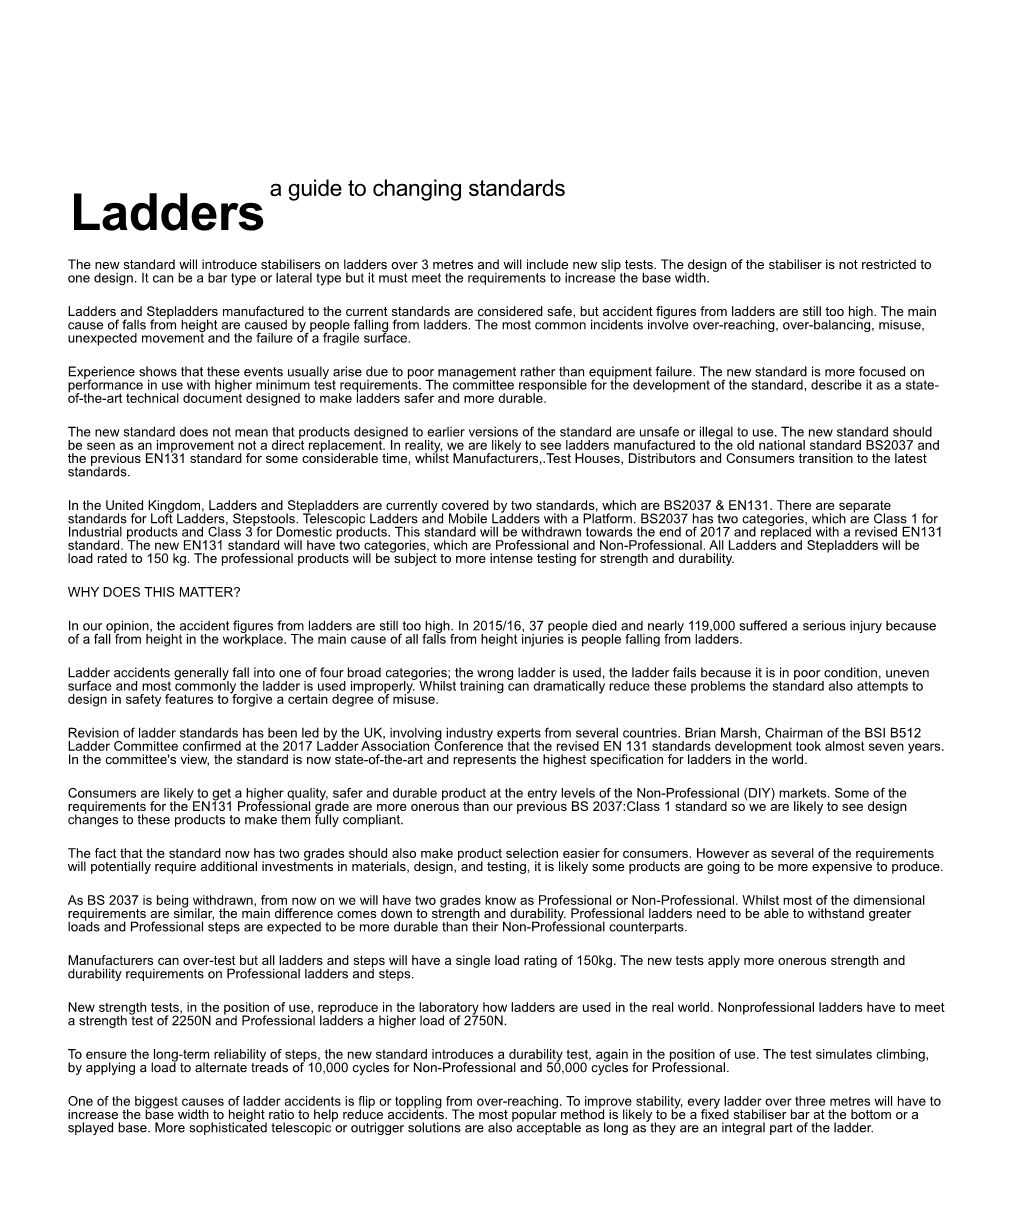 Ladders a Guide to Changing Standards